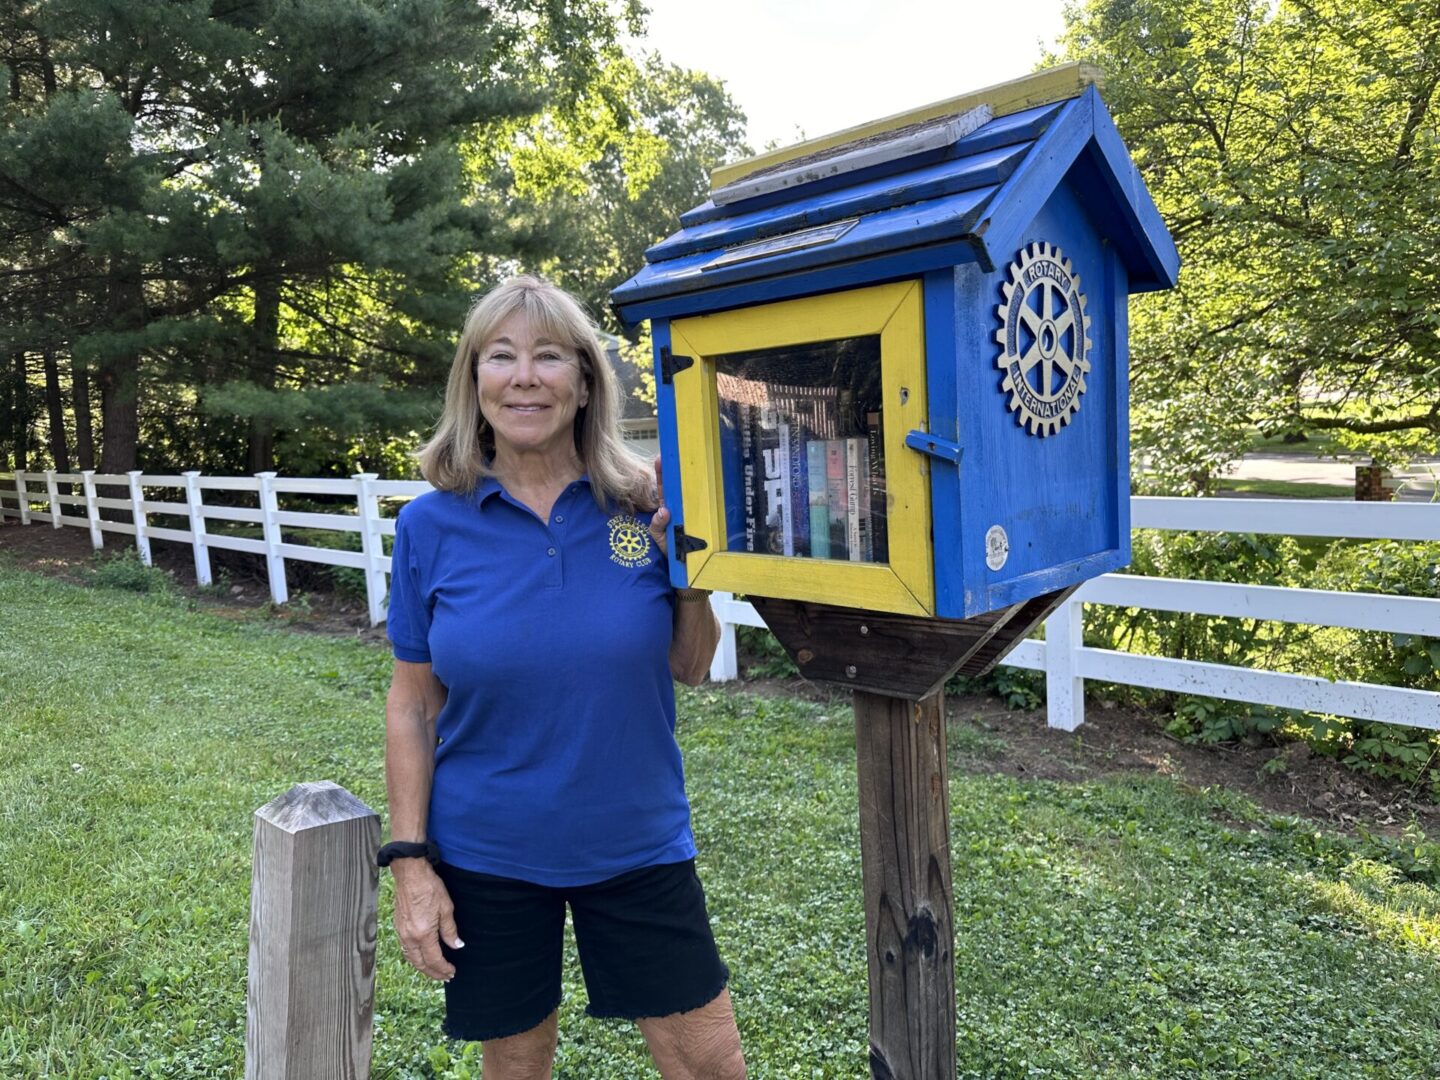 “Take a Book, Share a Book” at Little Free Libraries | Town&Gown